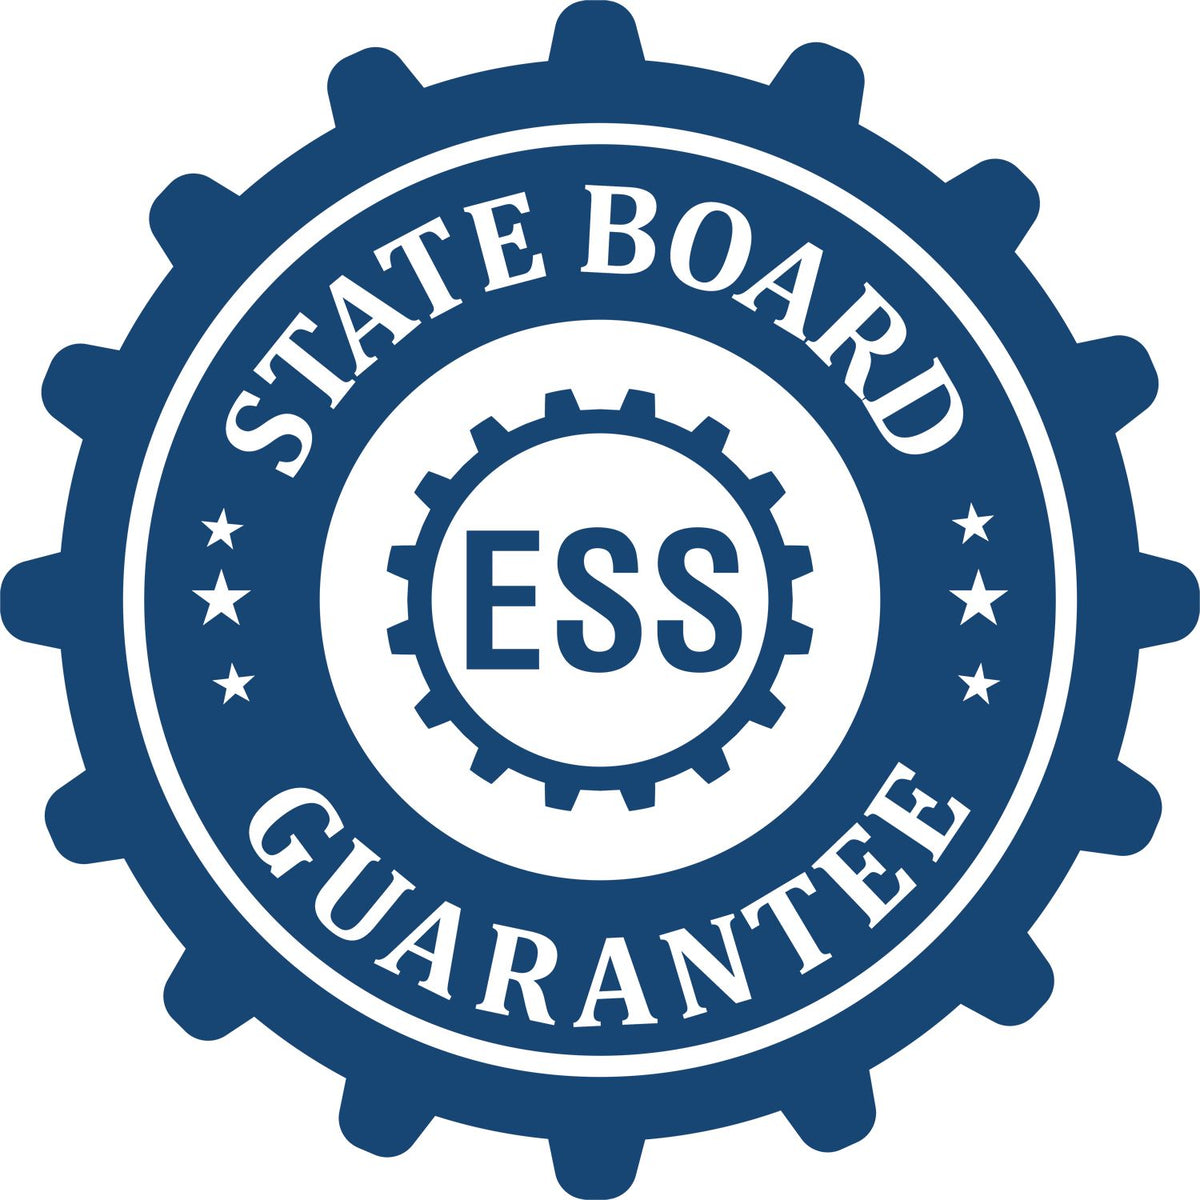 An emblem in a gear shape illustrating a state board guarantee for the Digital Louisiana Geologist Stamp, Electronic Seal for Louisiana Geologist